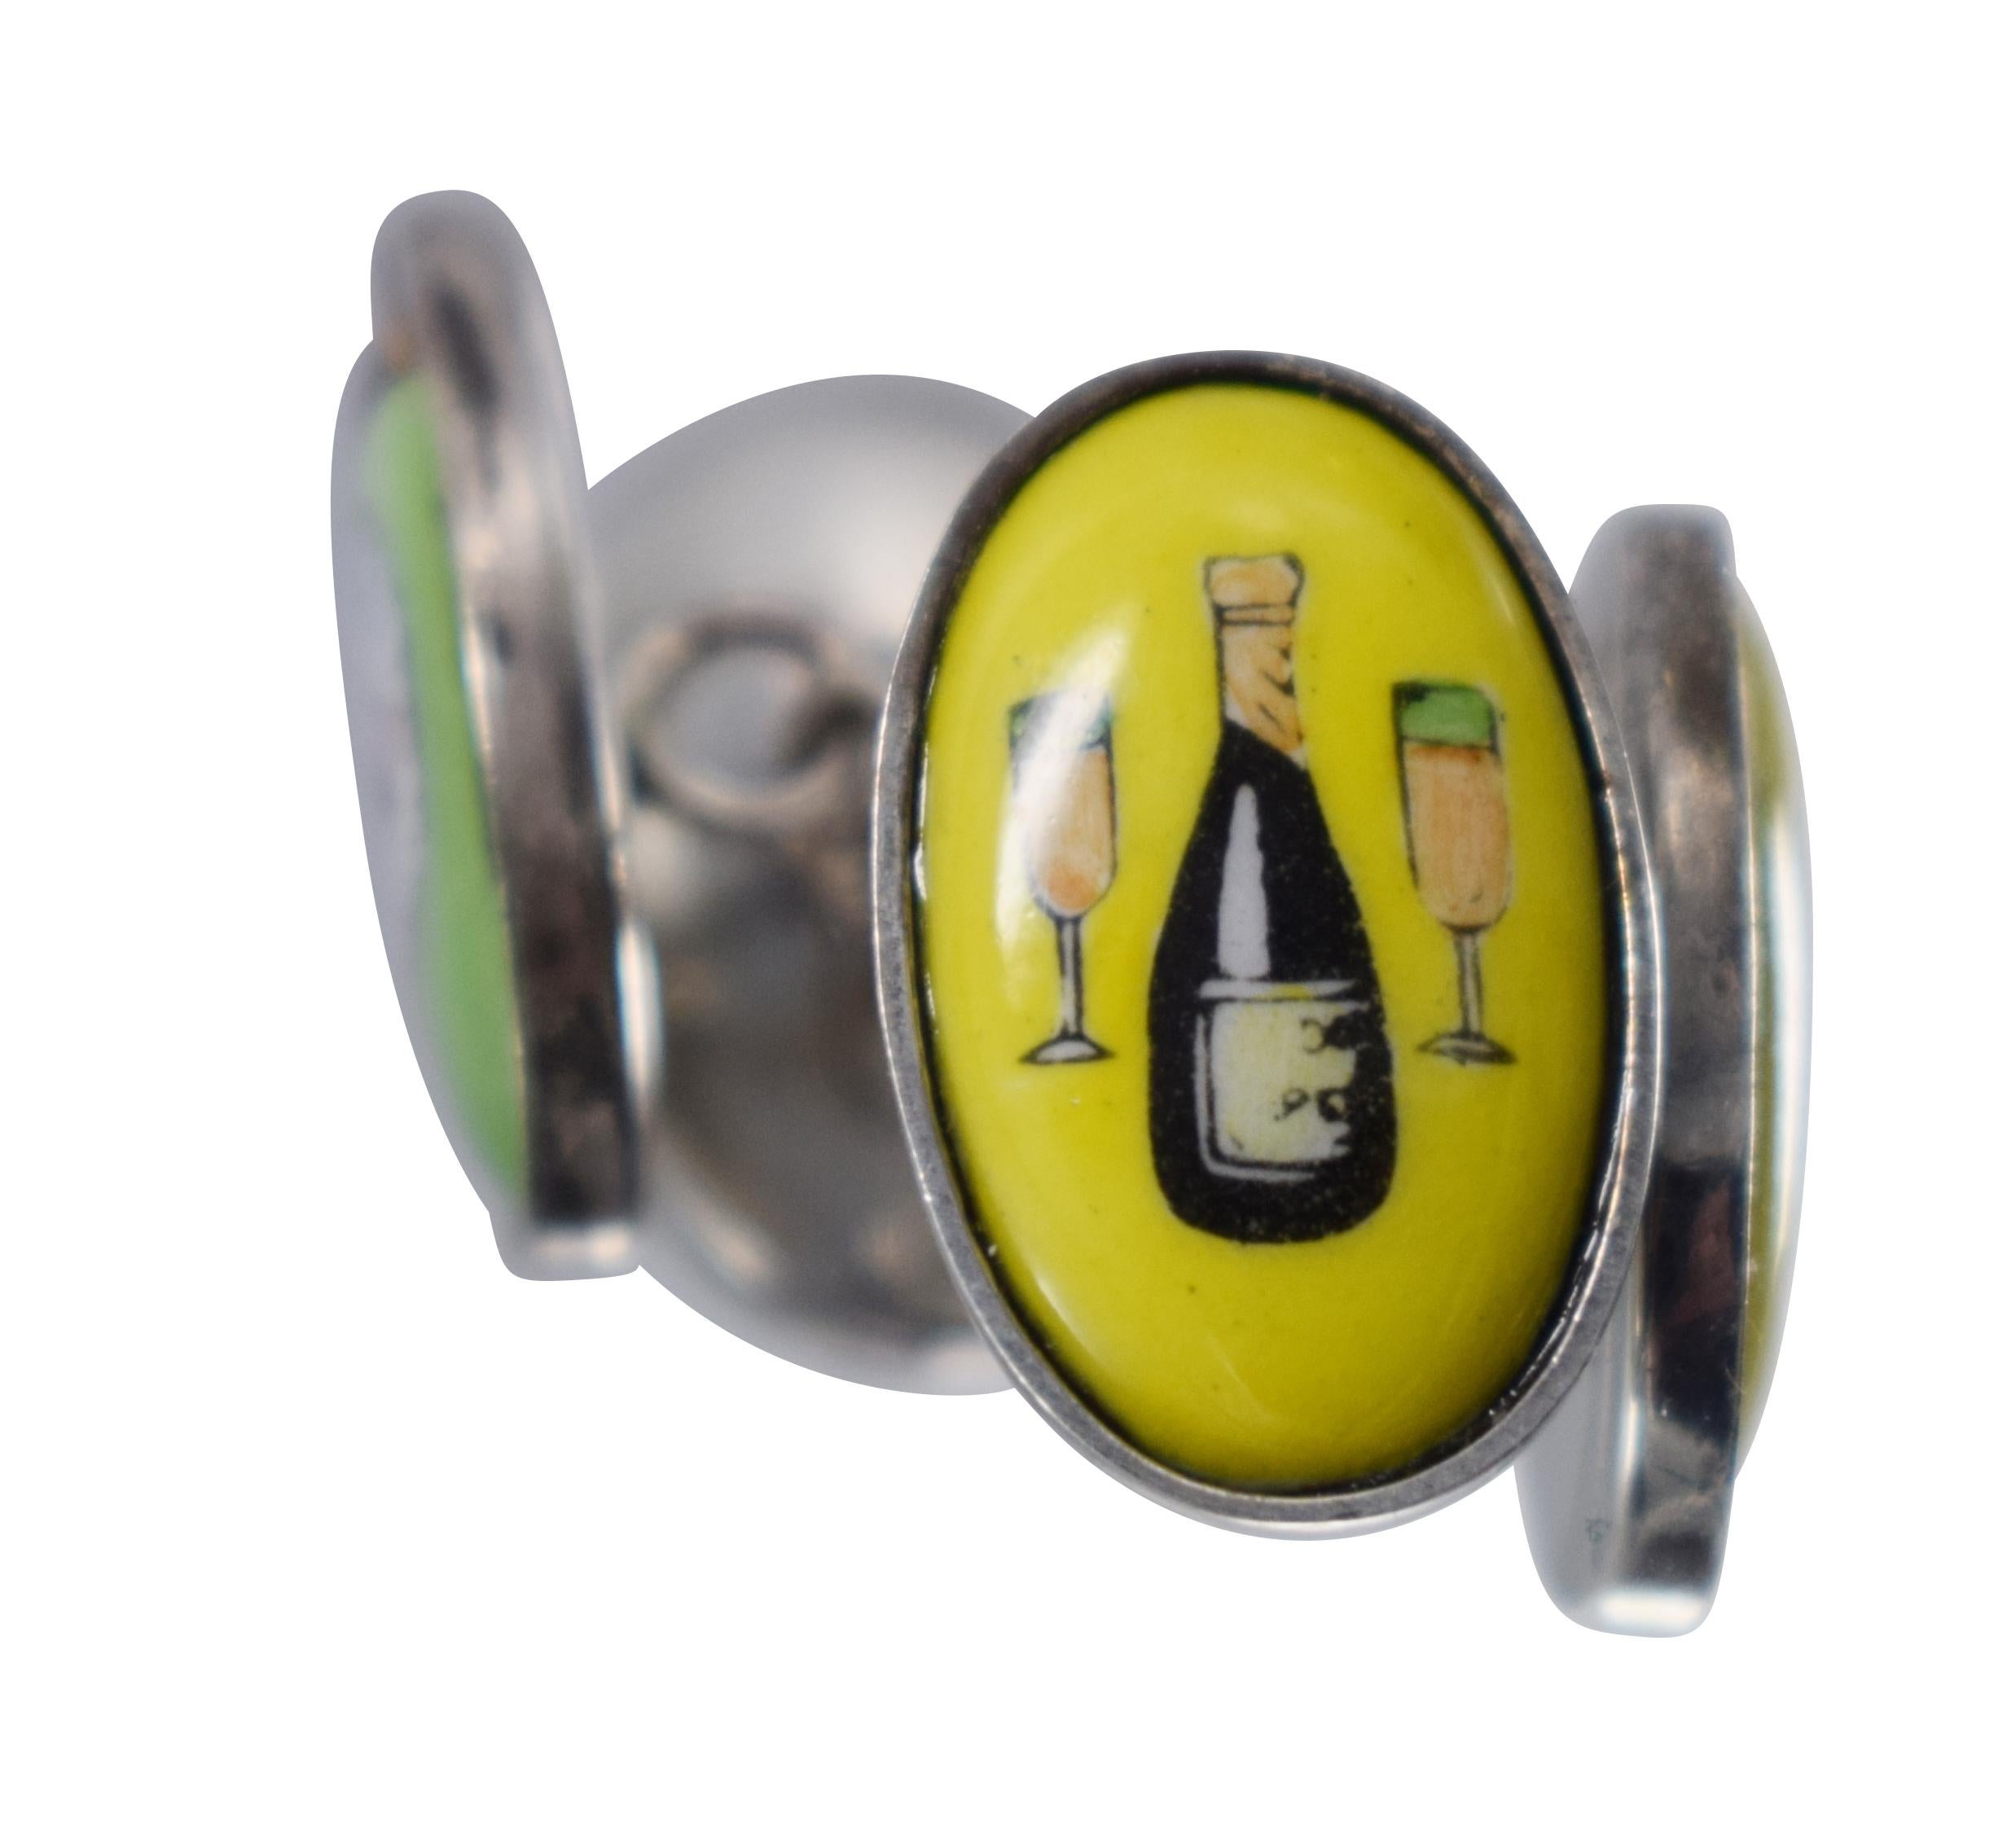 Art Deco Fine Quality 'the Four Vices' Gents Cufflinks in Sterling Silver and Enamel